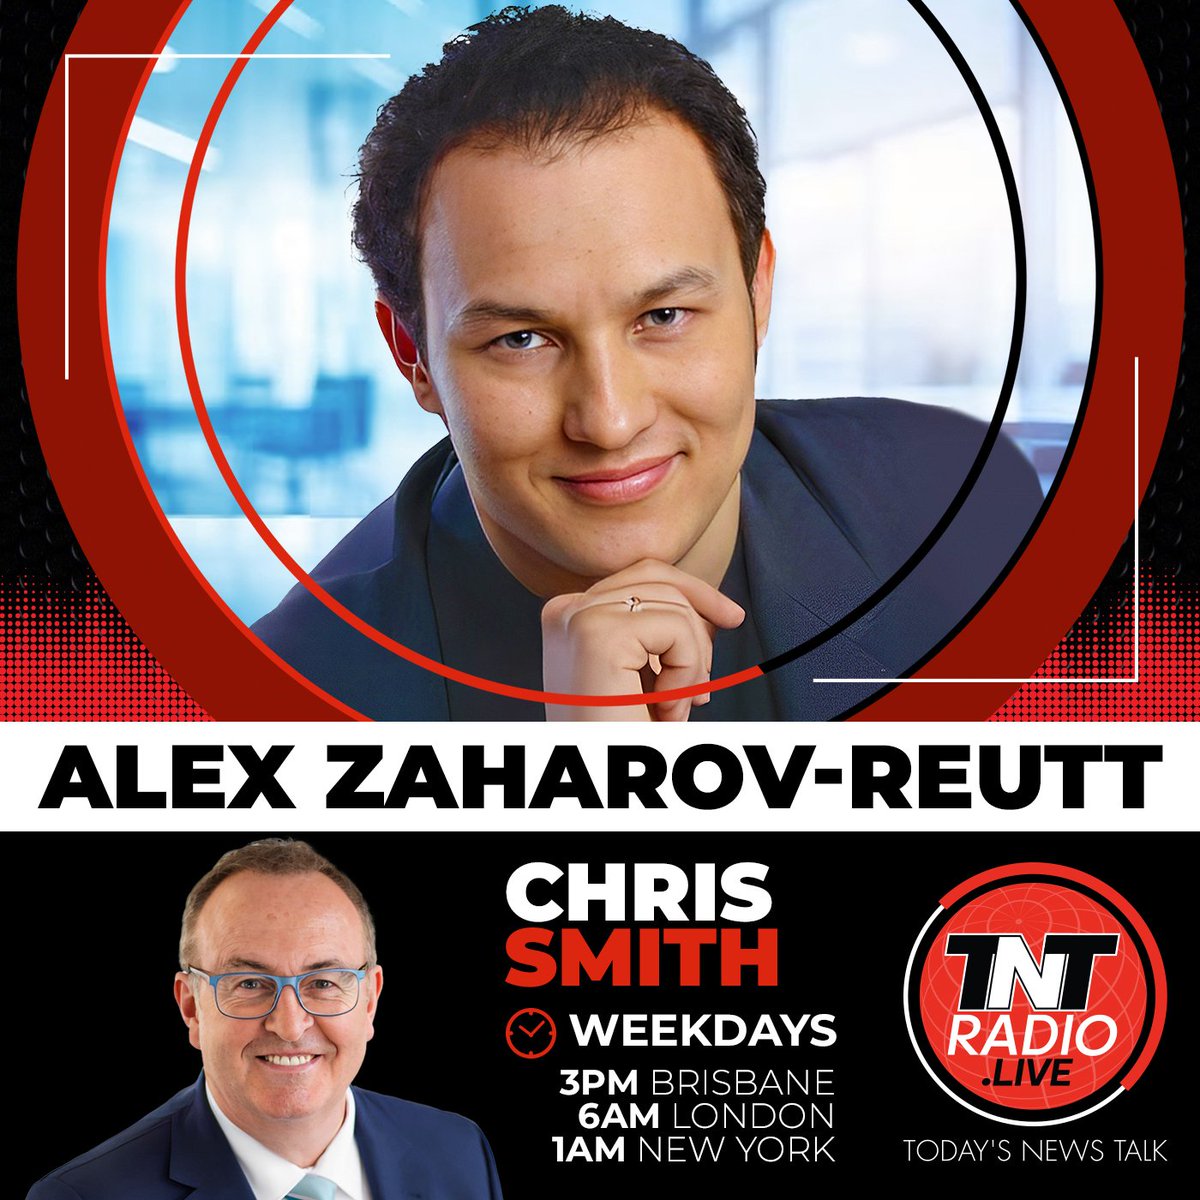 Coming up @alexonline888 on the biggest #technology & #CYBER news in the world! @tntradiolive